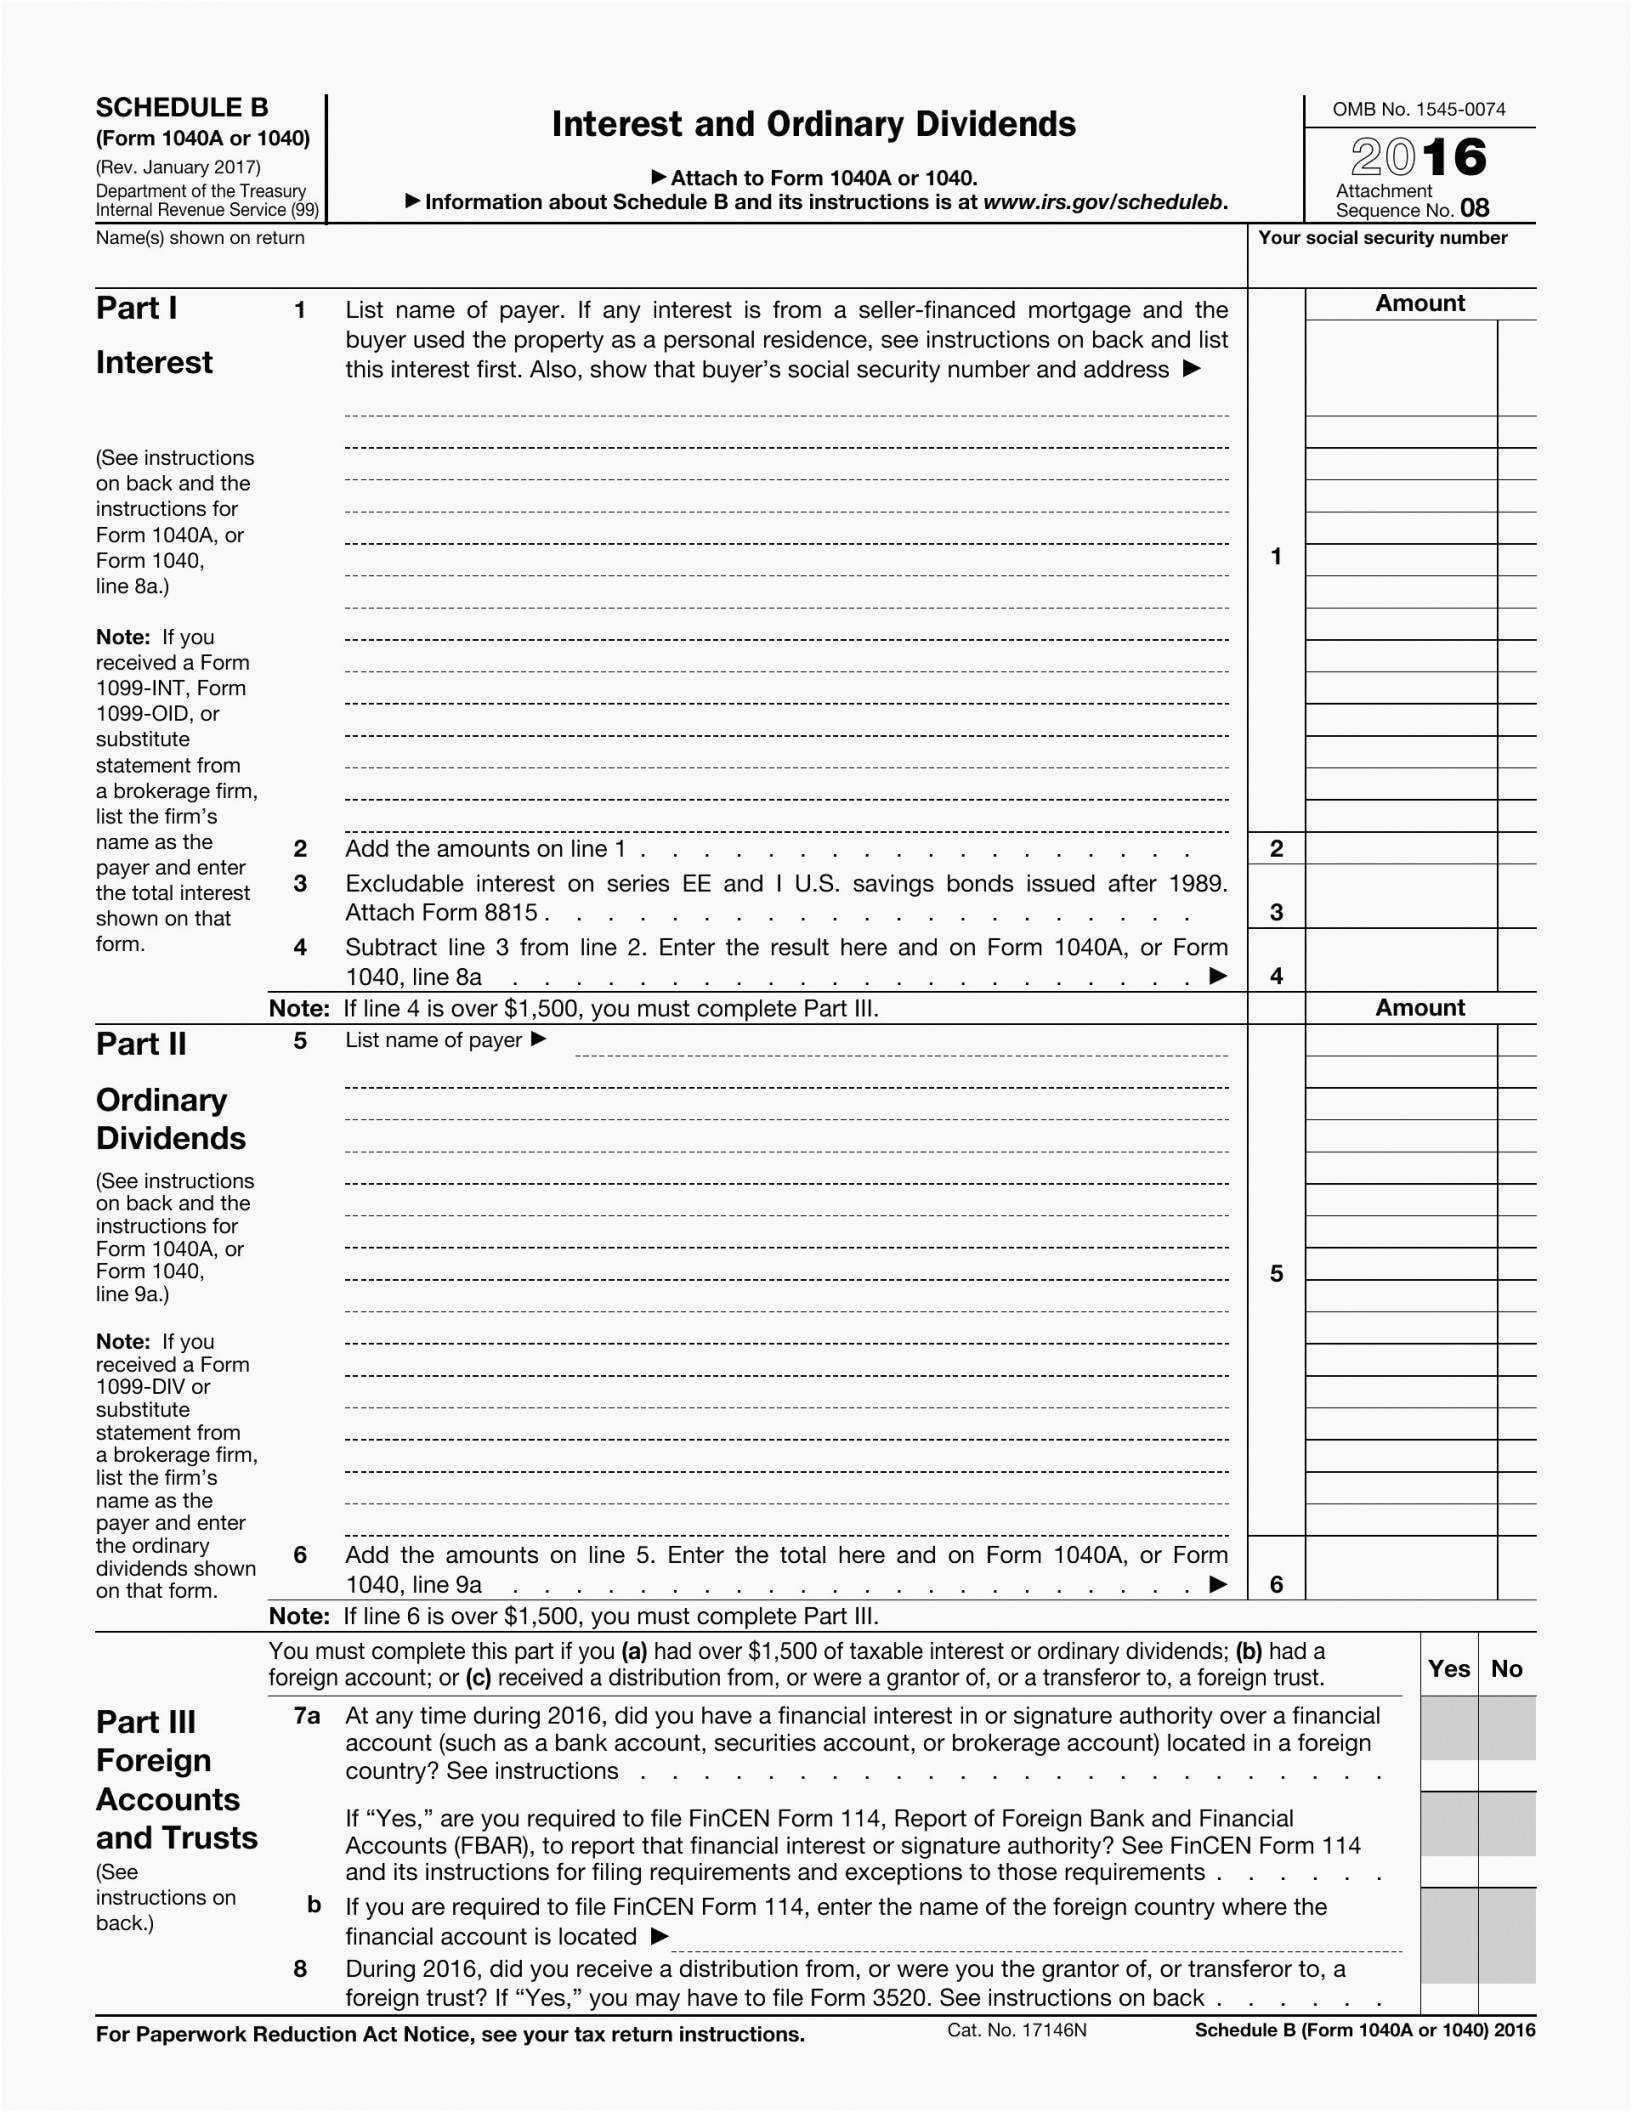 Qualified Dividends And Capital Gain Tax Worksheet 1040A Throughout Qualified Dividends And Capital Gain Tax Worksheet 1040A